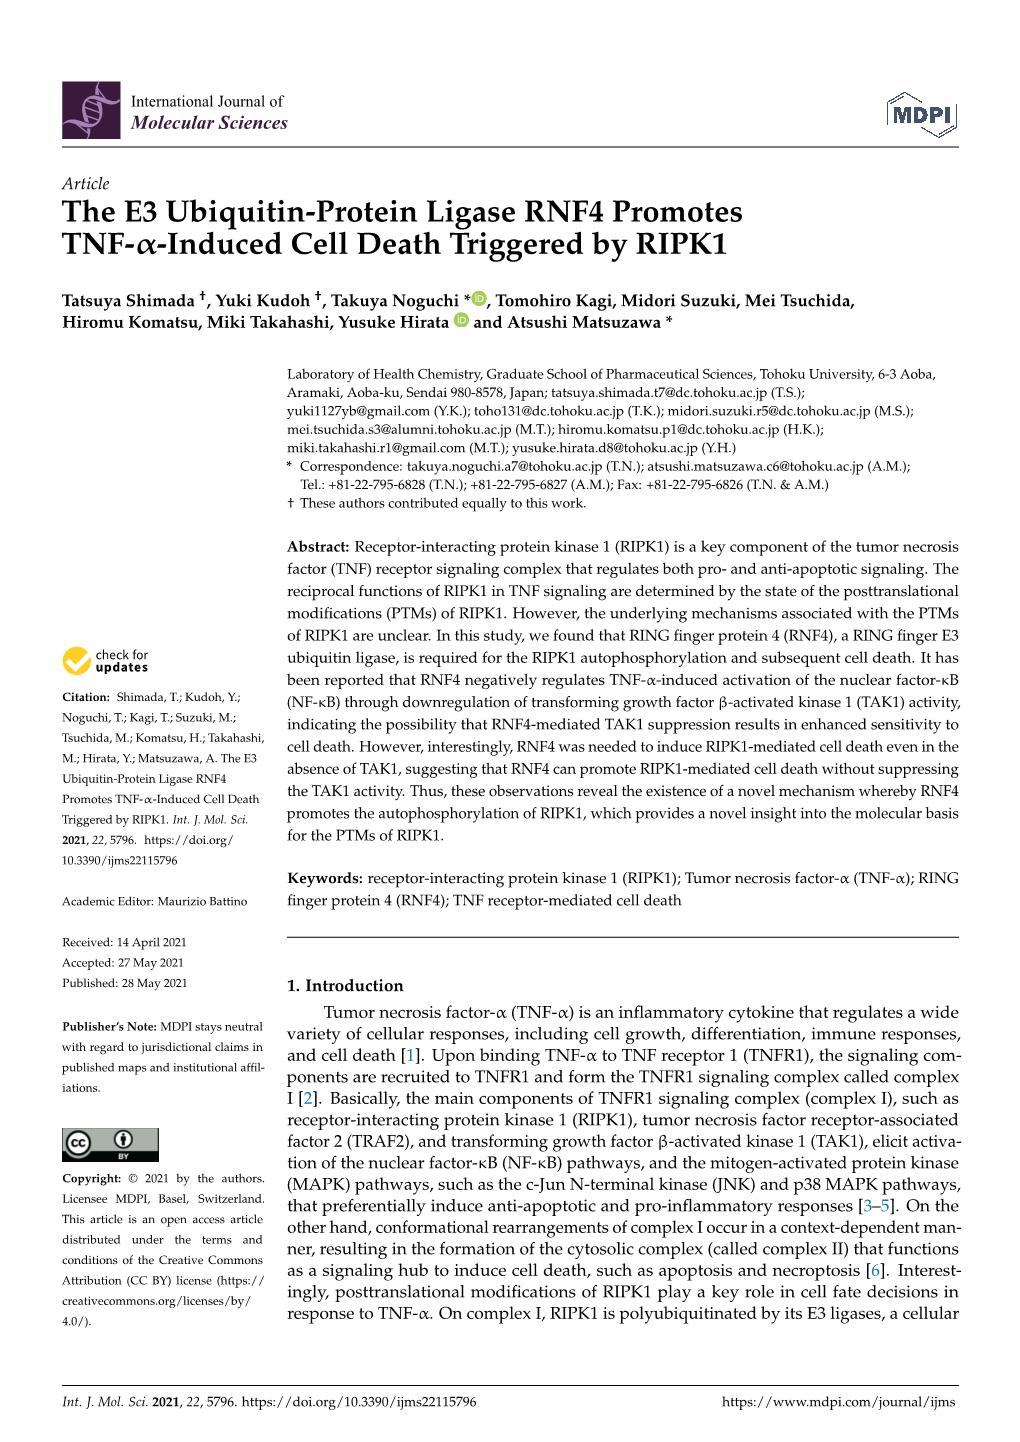 The E3 Ubiquitin-Protein Ligase RNF4 Promotes TNF–Induced Cell Death